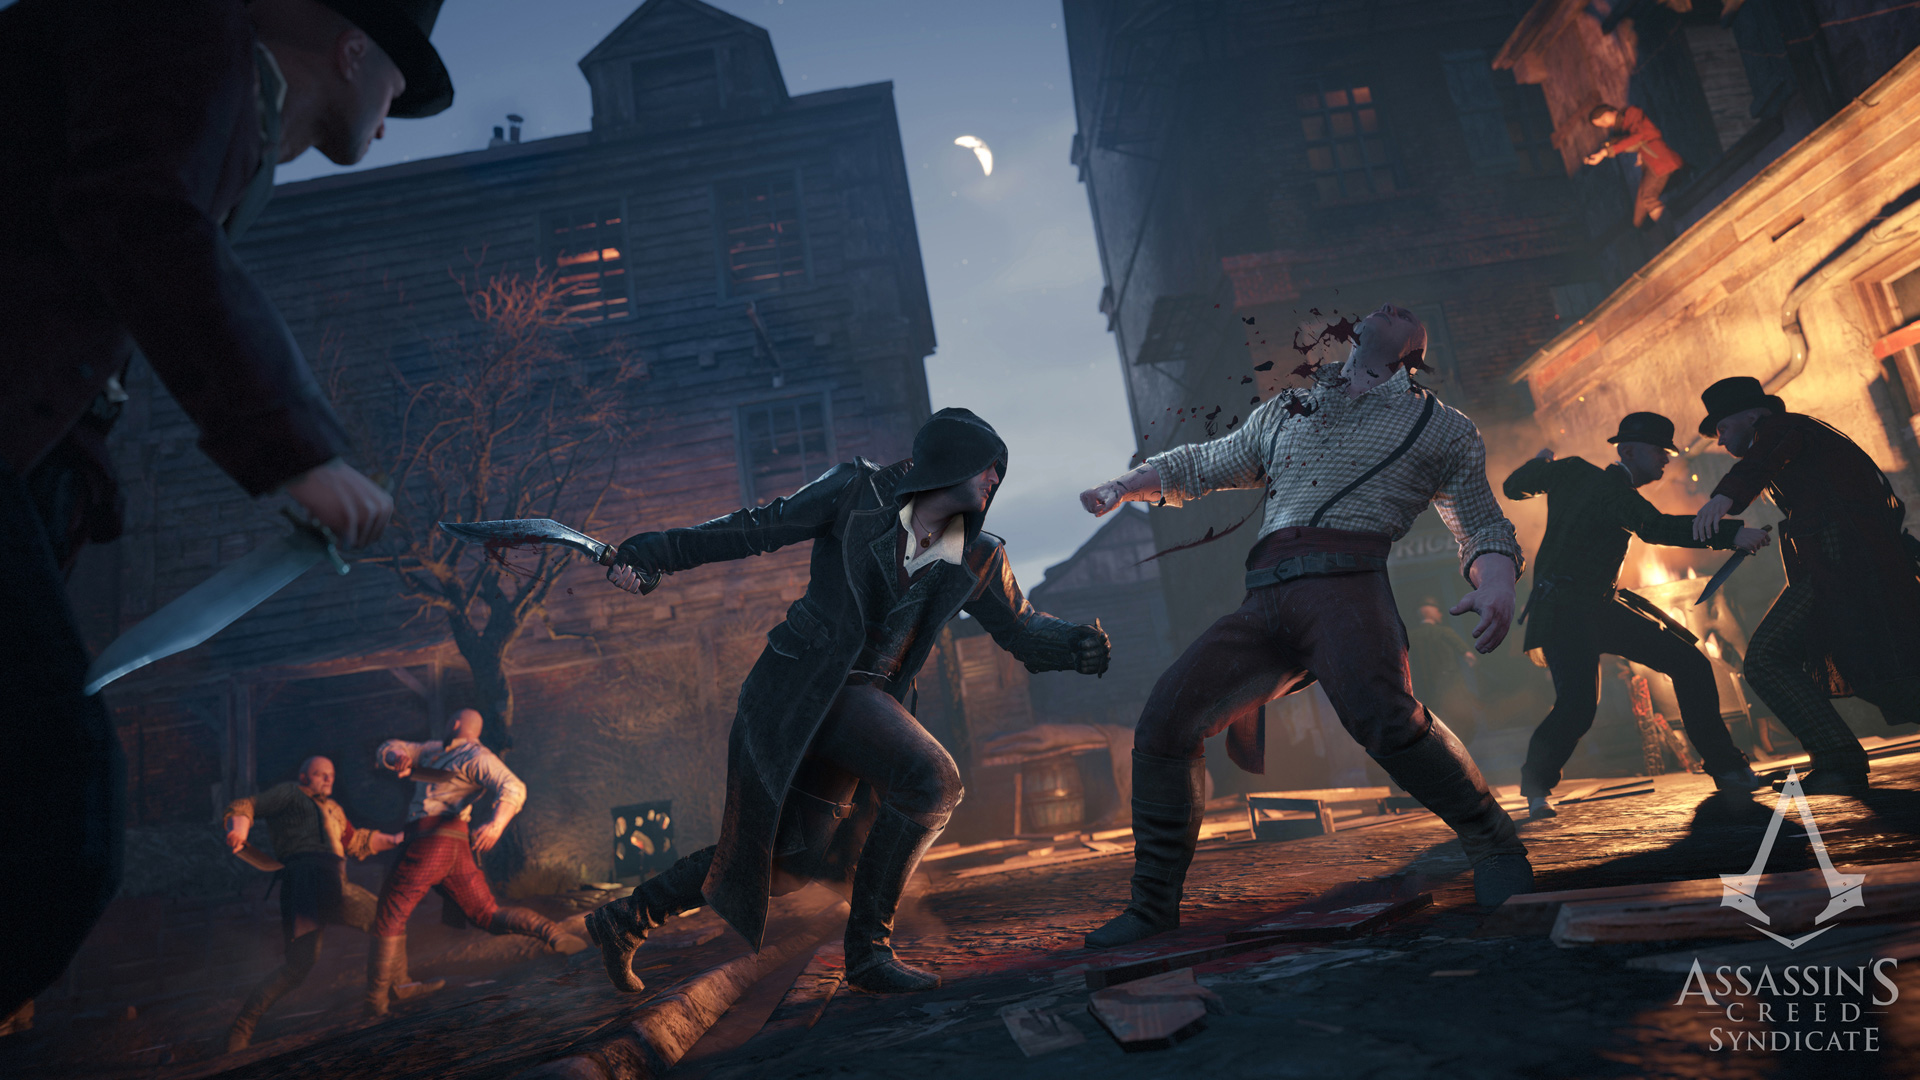 Assassin's Creed: Syndicate Xbox One review